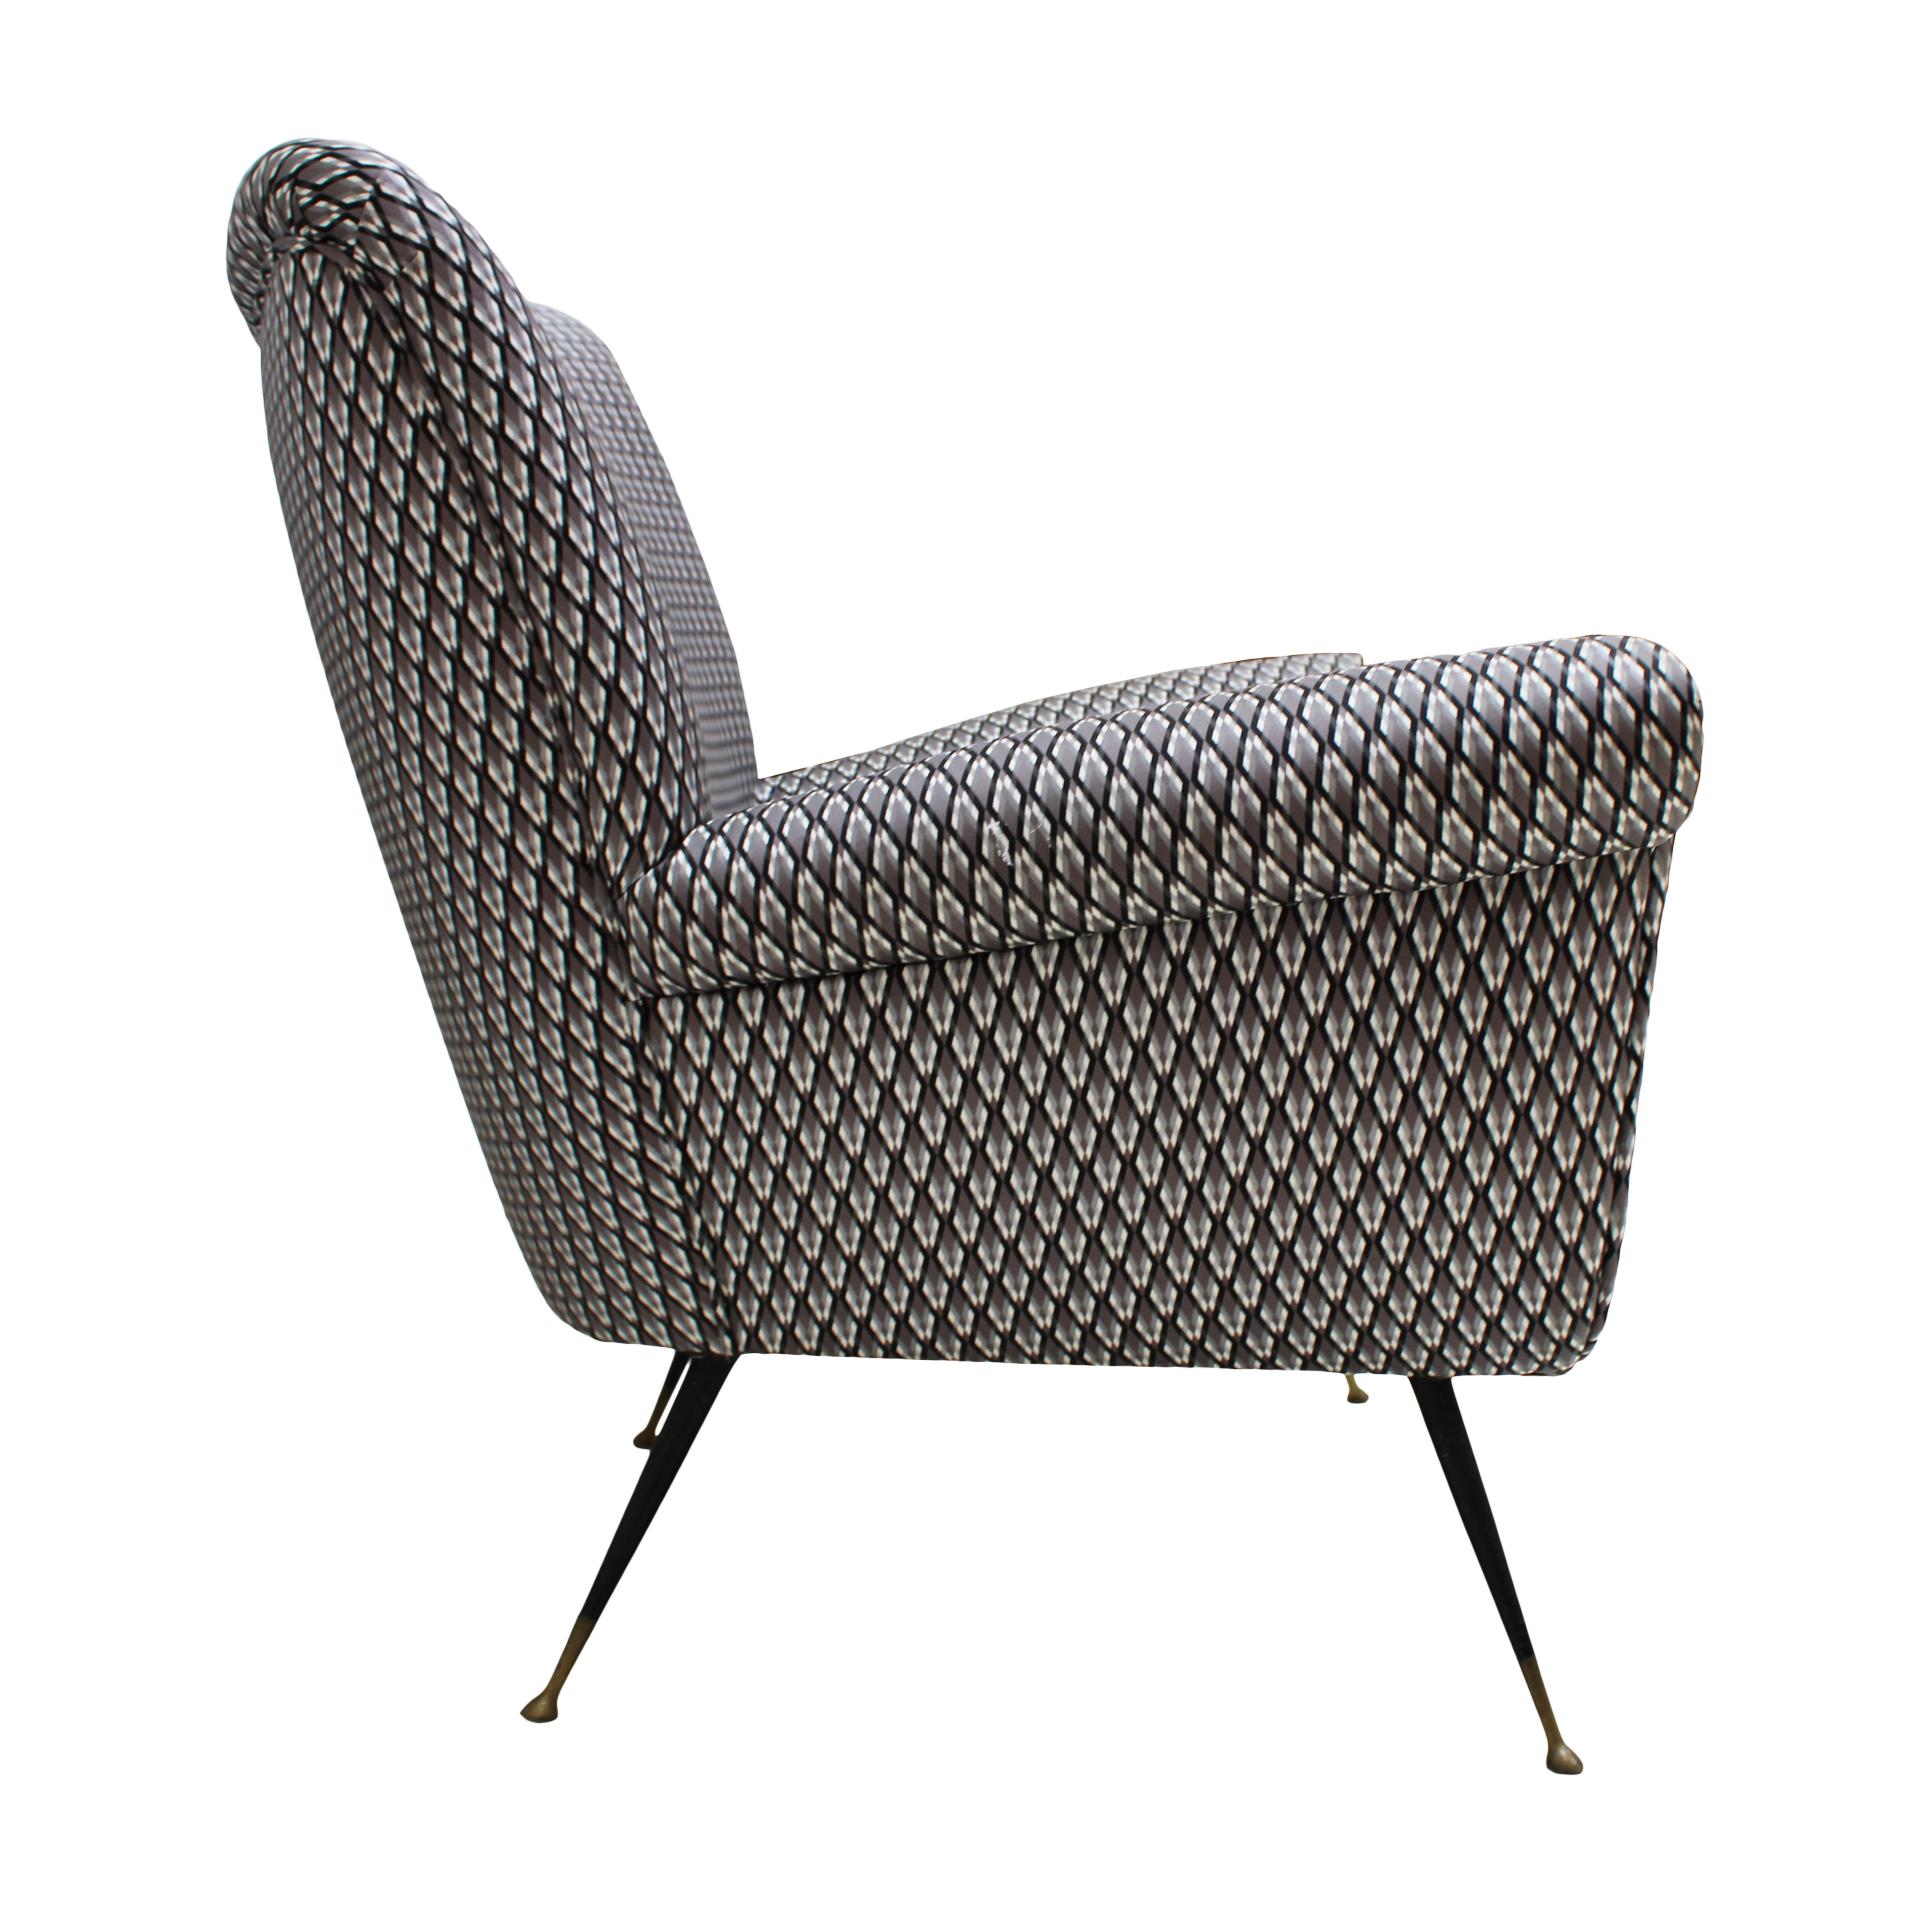 Armchair designed by Gigi Radice for Minotti with solid wood structure and metal legs. Upholstery in cotton with 